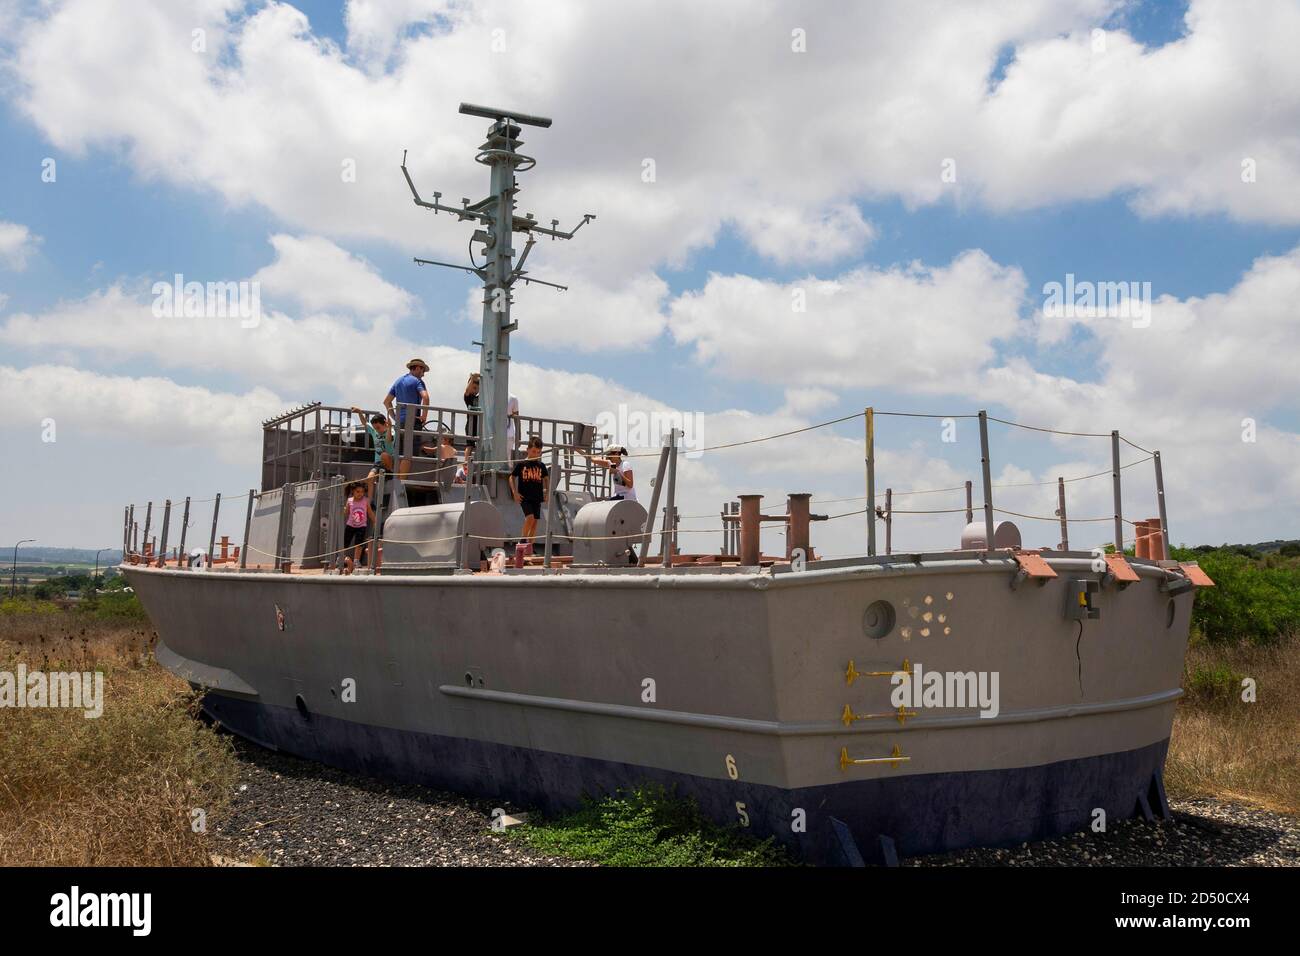 Children explore and play on an Out of Service Israeli Navy patrol boat Dabur class Stock Photo